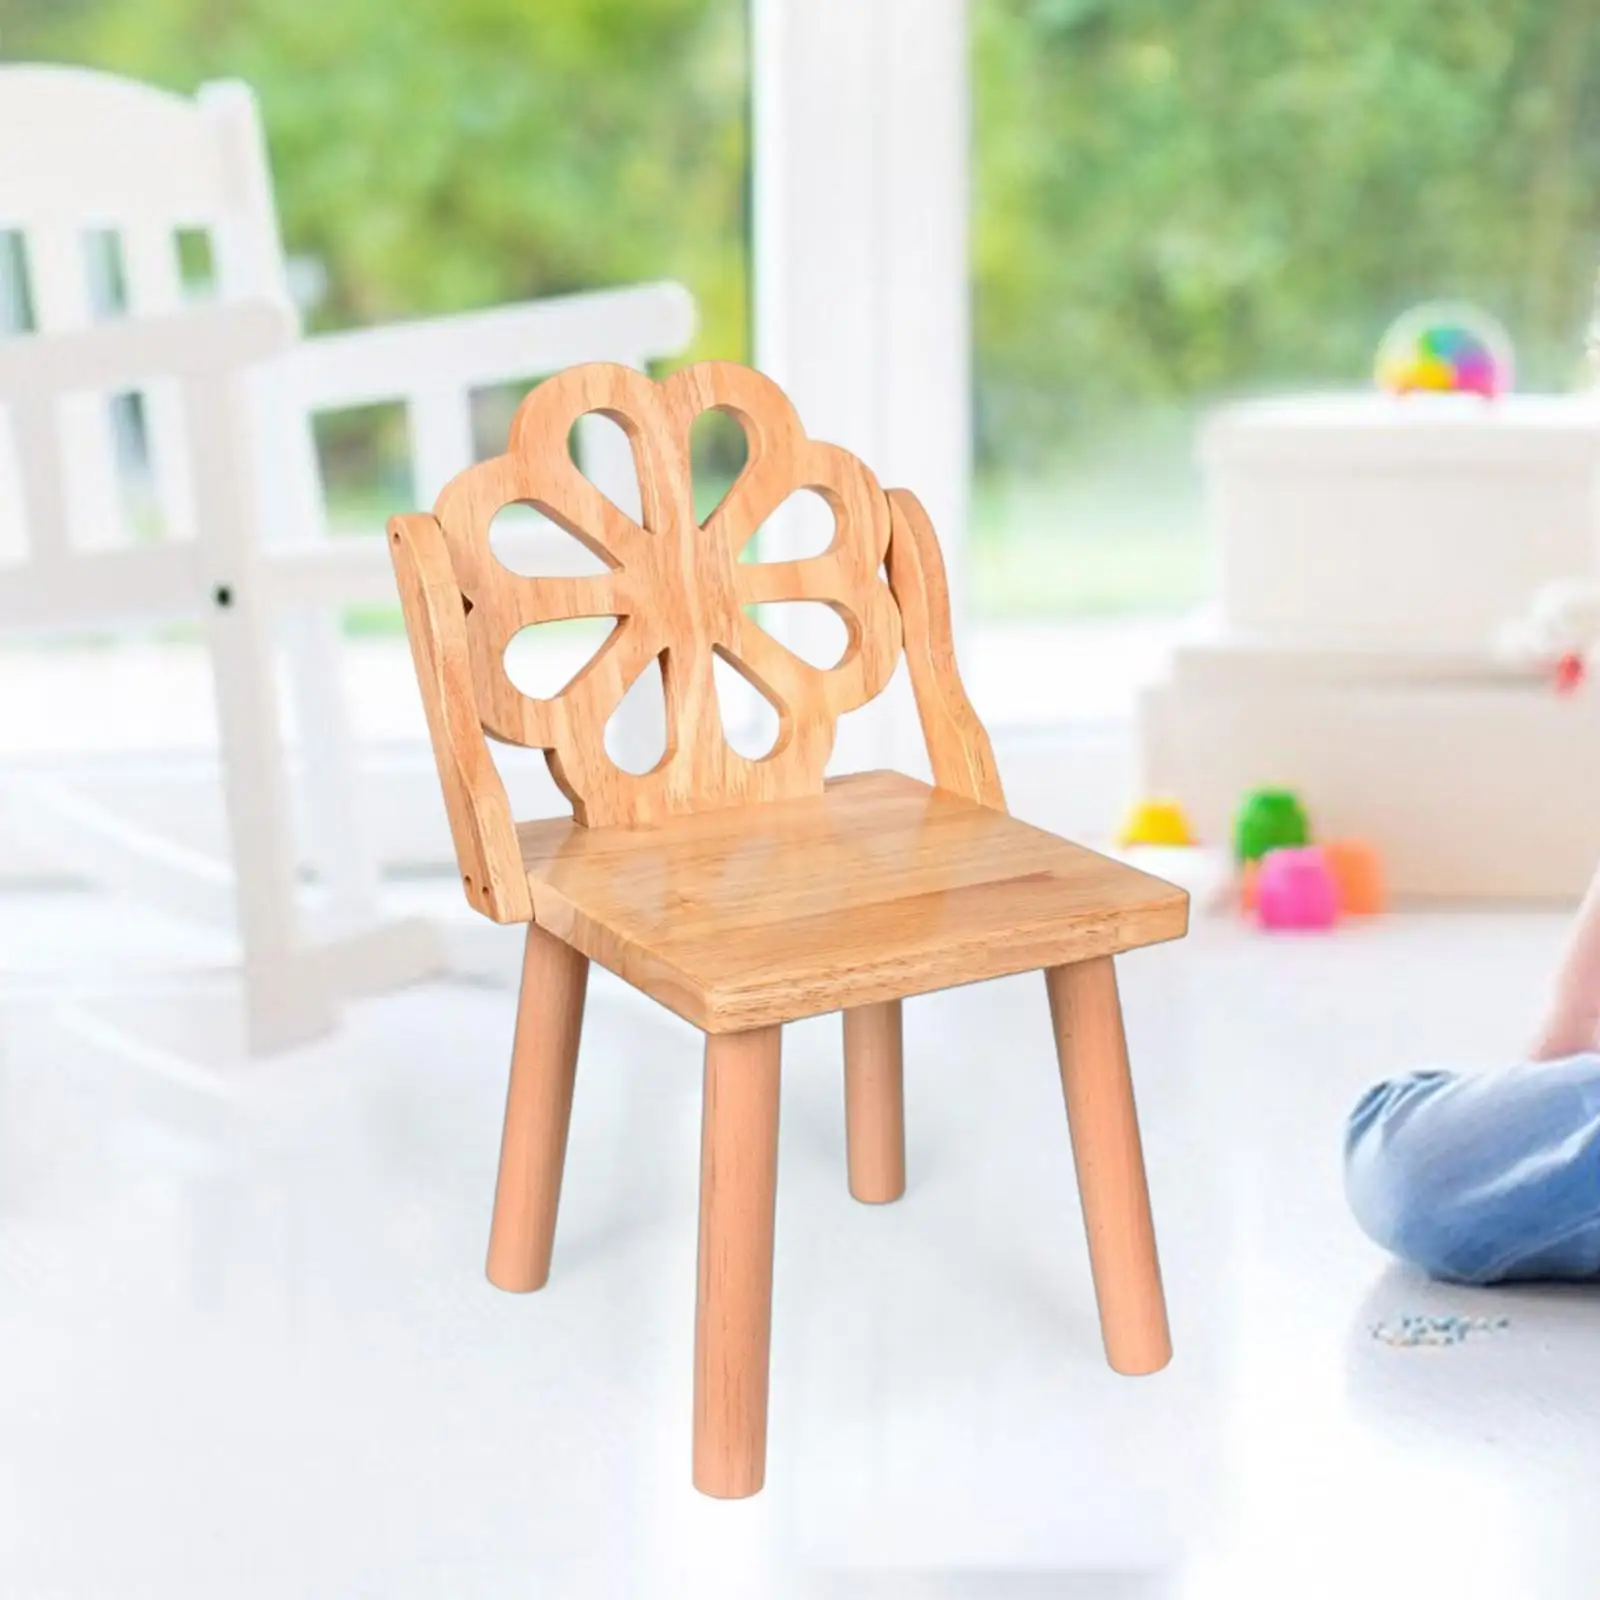 Household Removable Wooden Child Stool Heavy Duty Wood High Chair Anti Slip Lightweight Durable Wooden Wooden Toys for Children